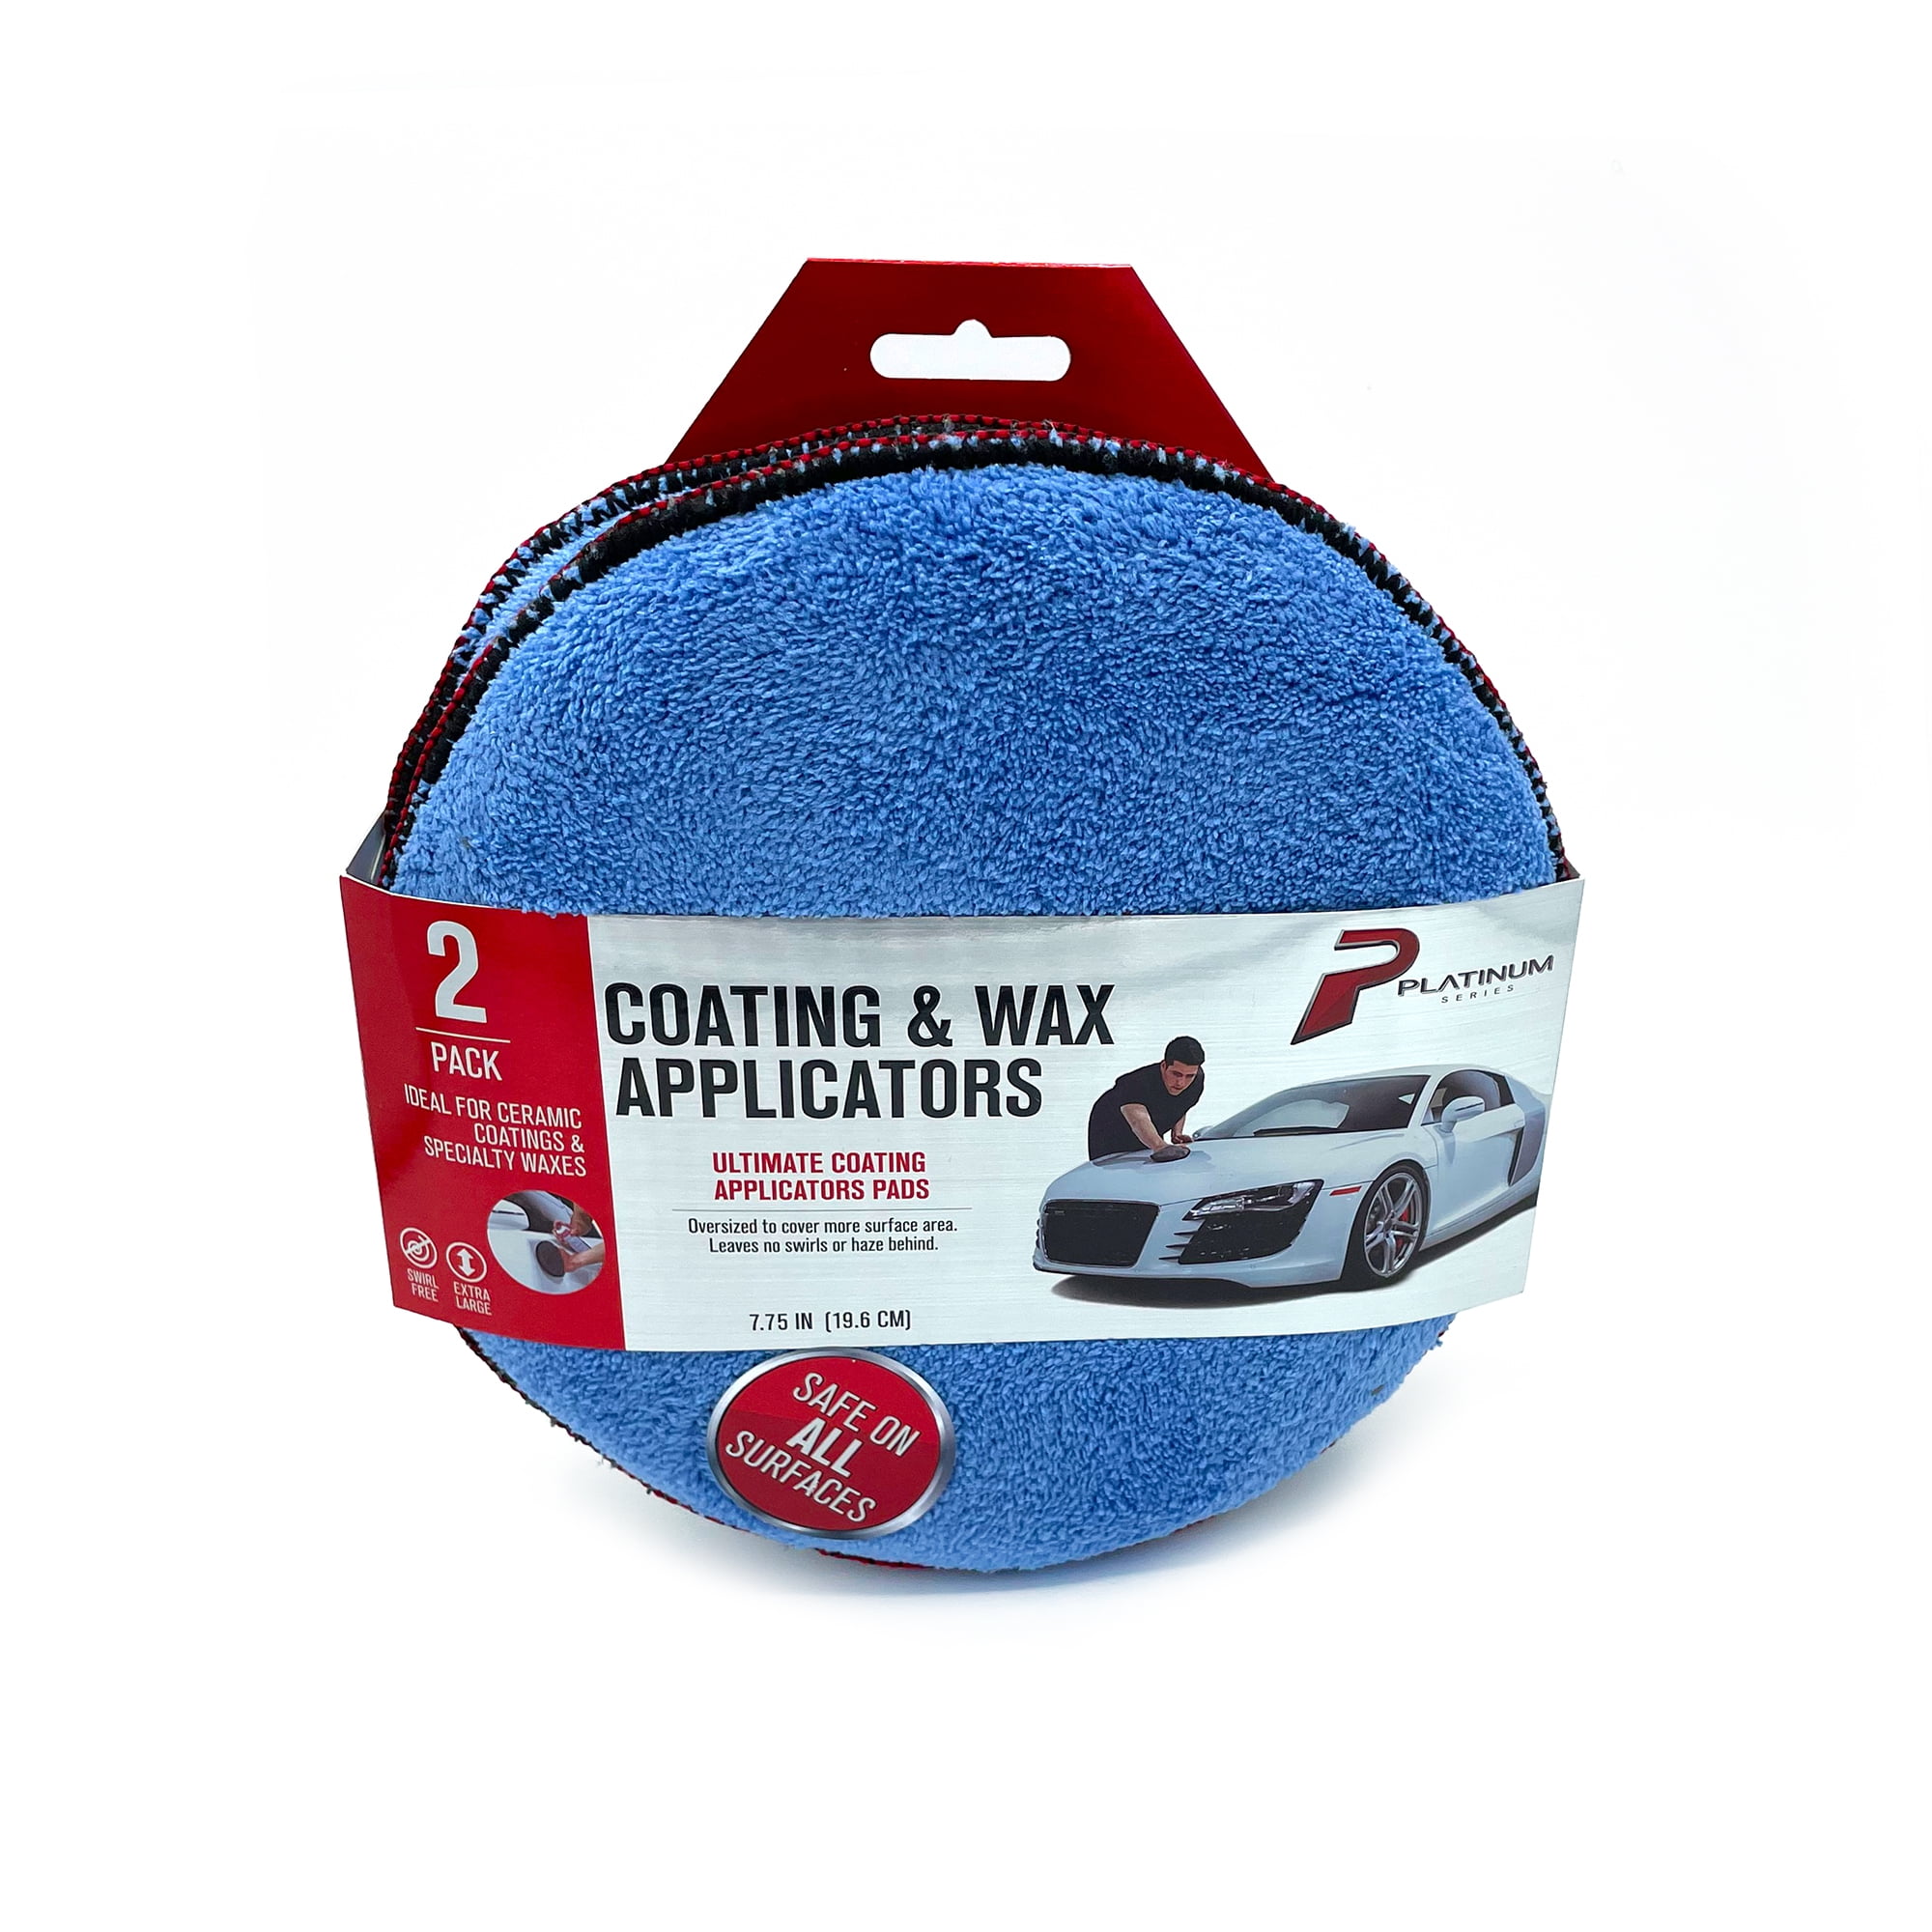 Paint Sponge Applicator for Arts and Crafts & Car Waxing 2 Pack Double-Sided Round Blue 